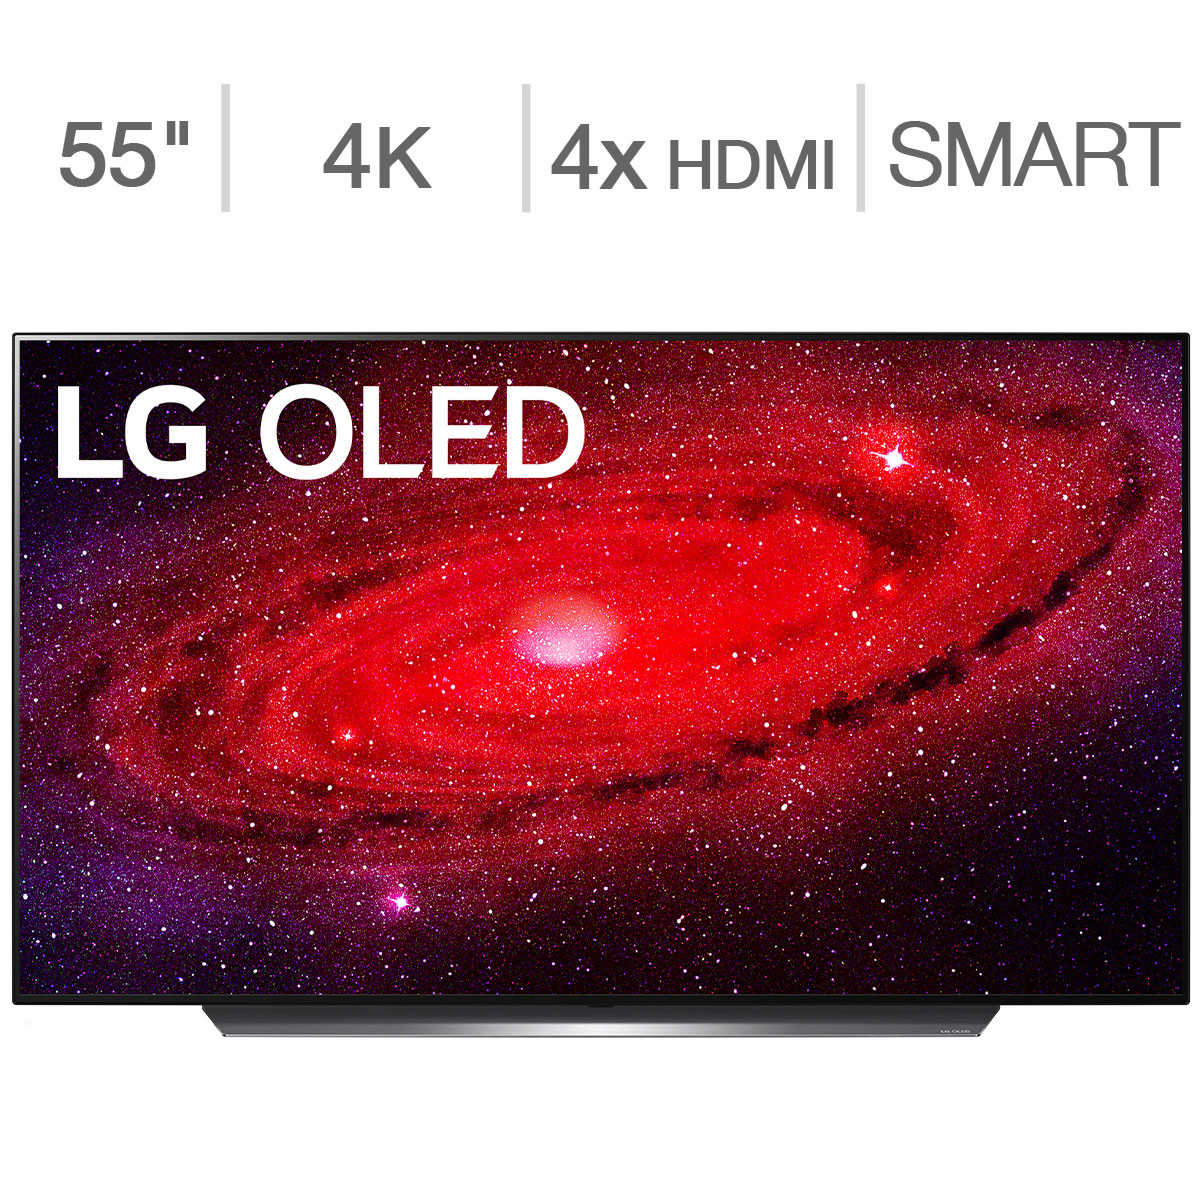 Lg 55 Class Cx Series 4k Uhd Oled Tv 100 Allstate Protection Plan Bundle Included